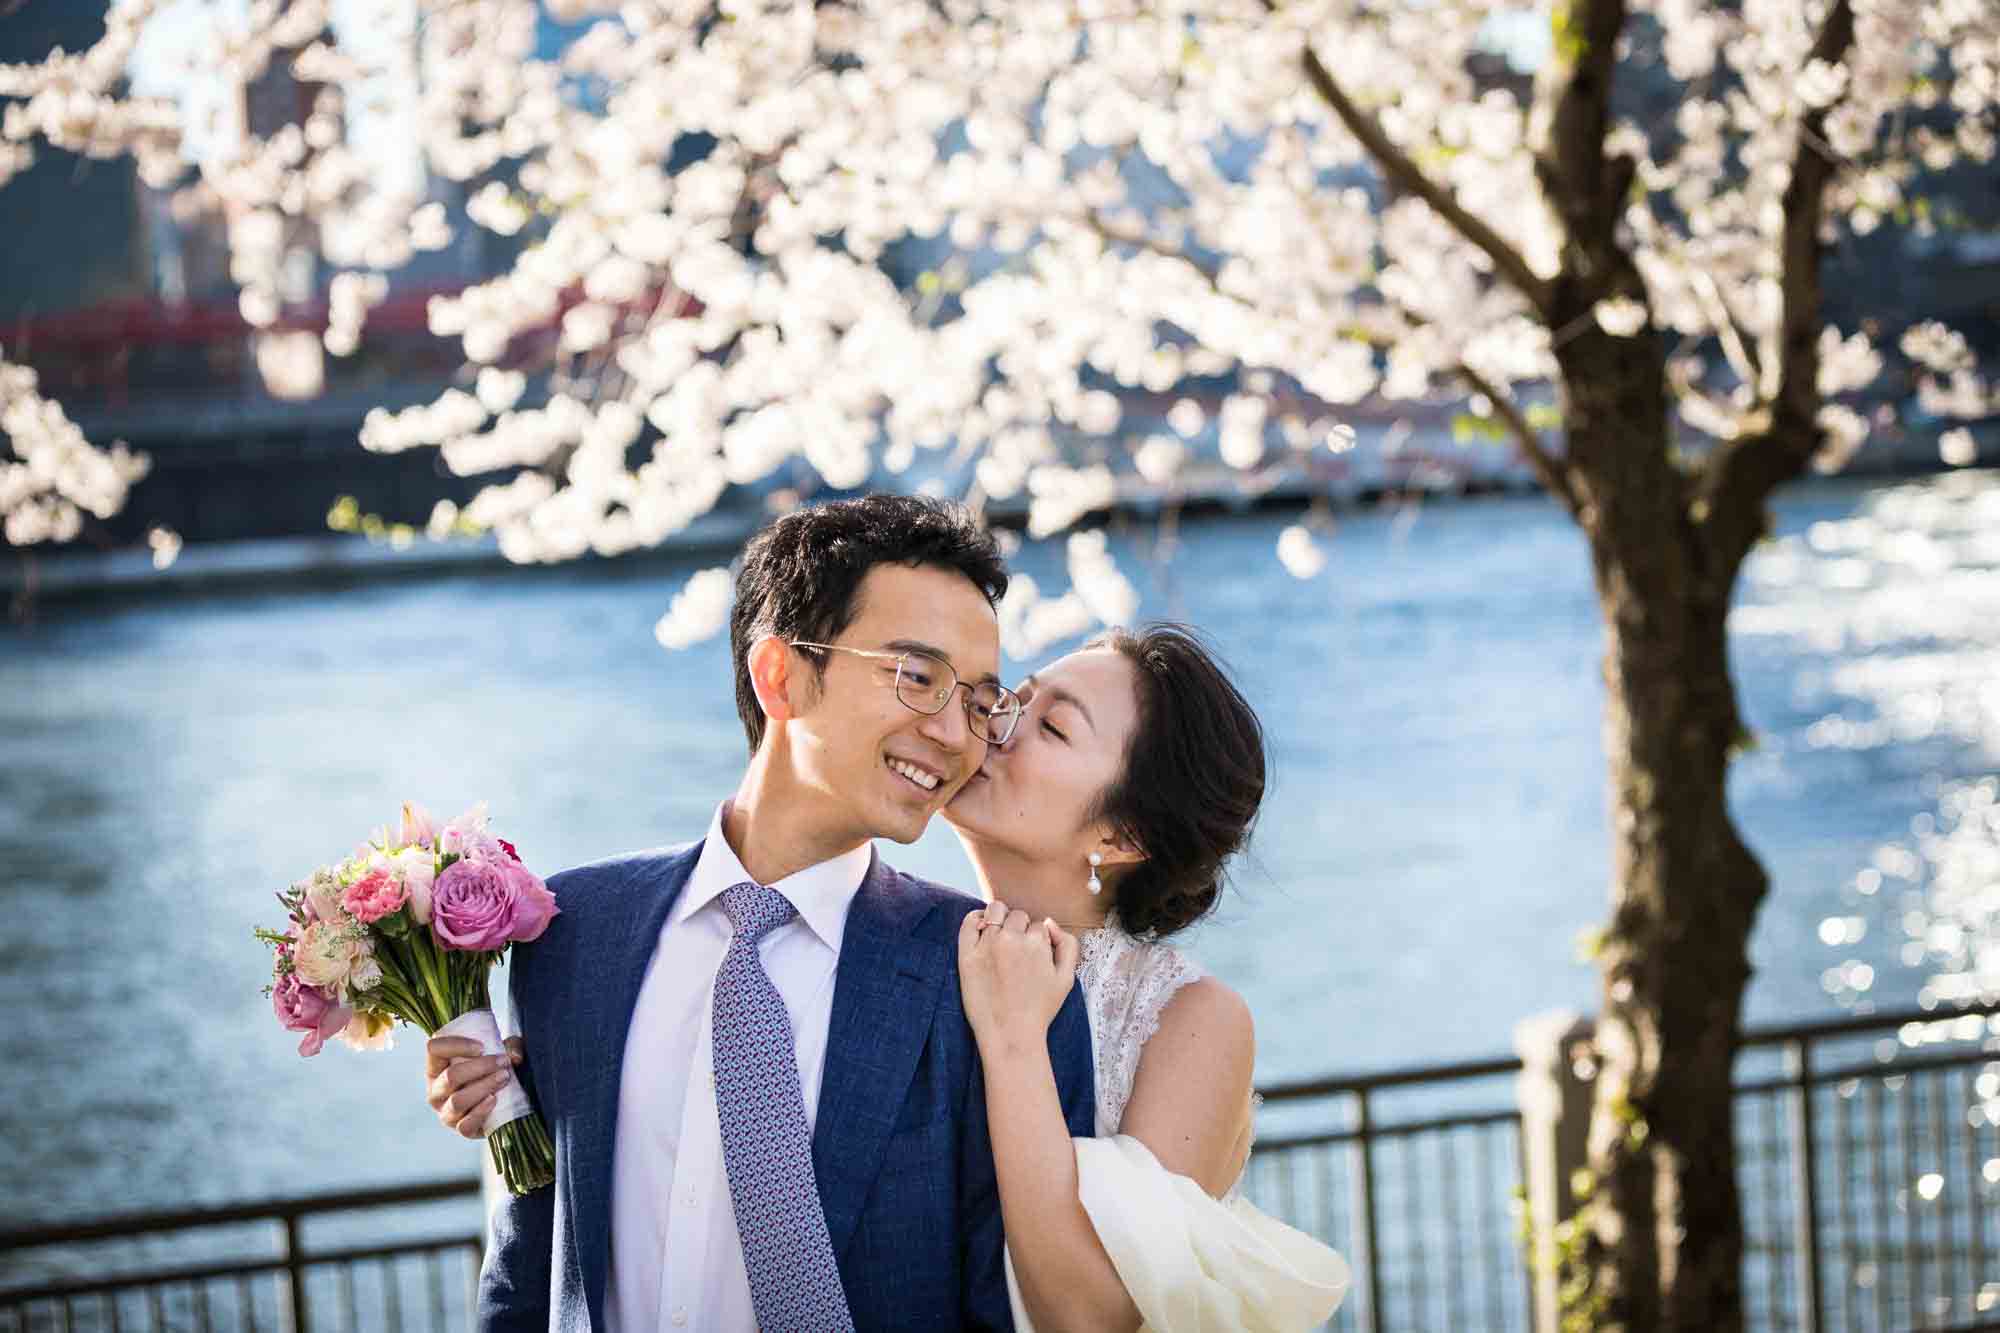 Couple kissing in front of cherry blossom trees and waterfront during a Roosevelt Island engagement photo shoot